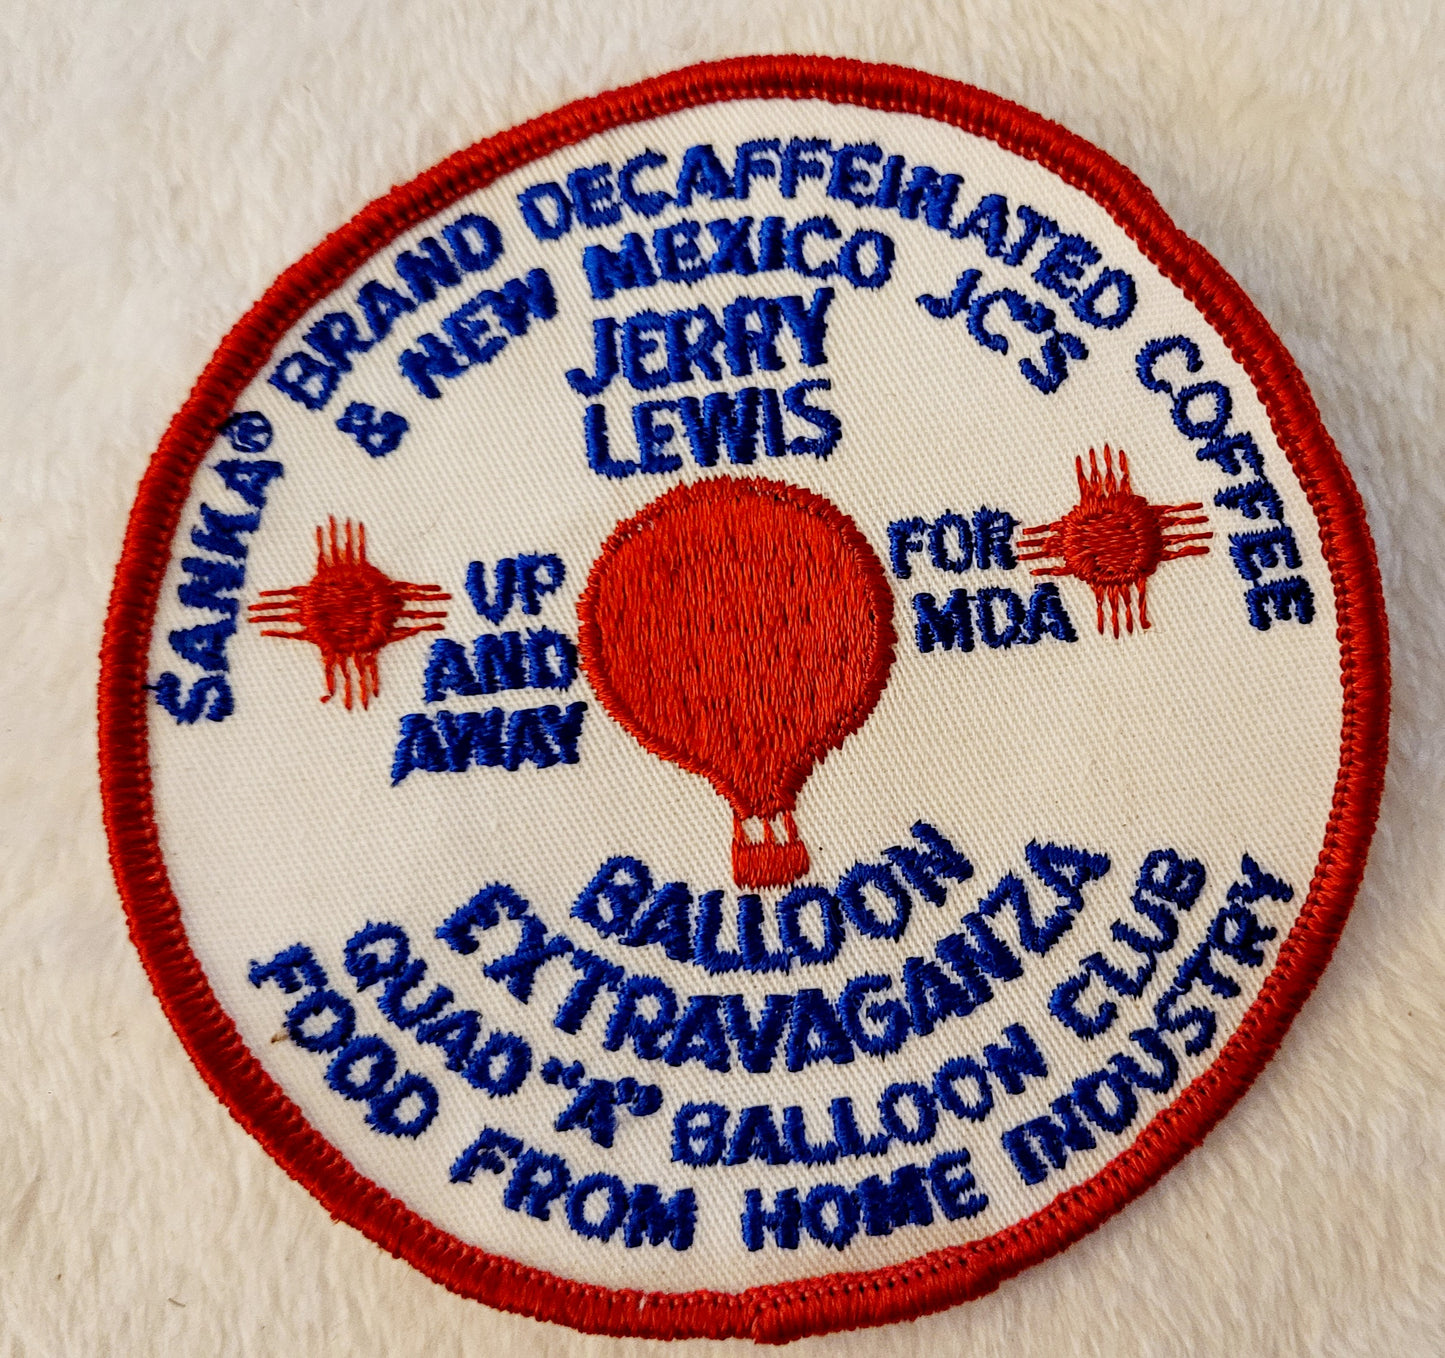 Up & Away for MDA *Hot Air Balloon 4" Round Patch